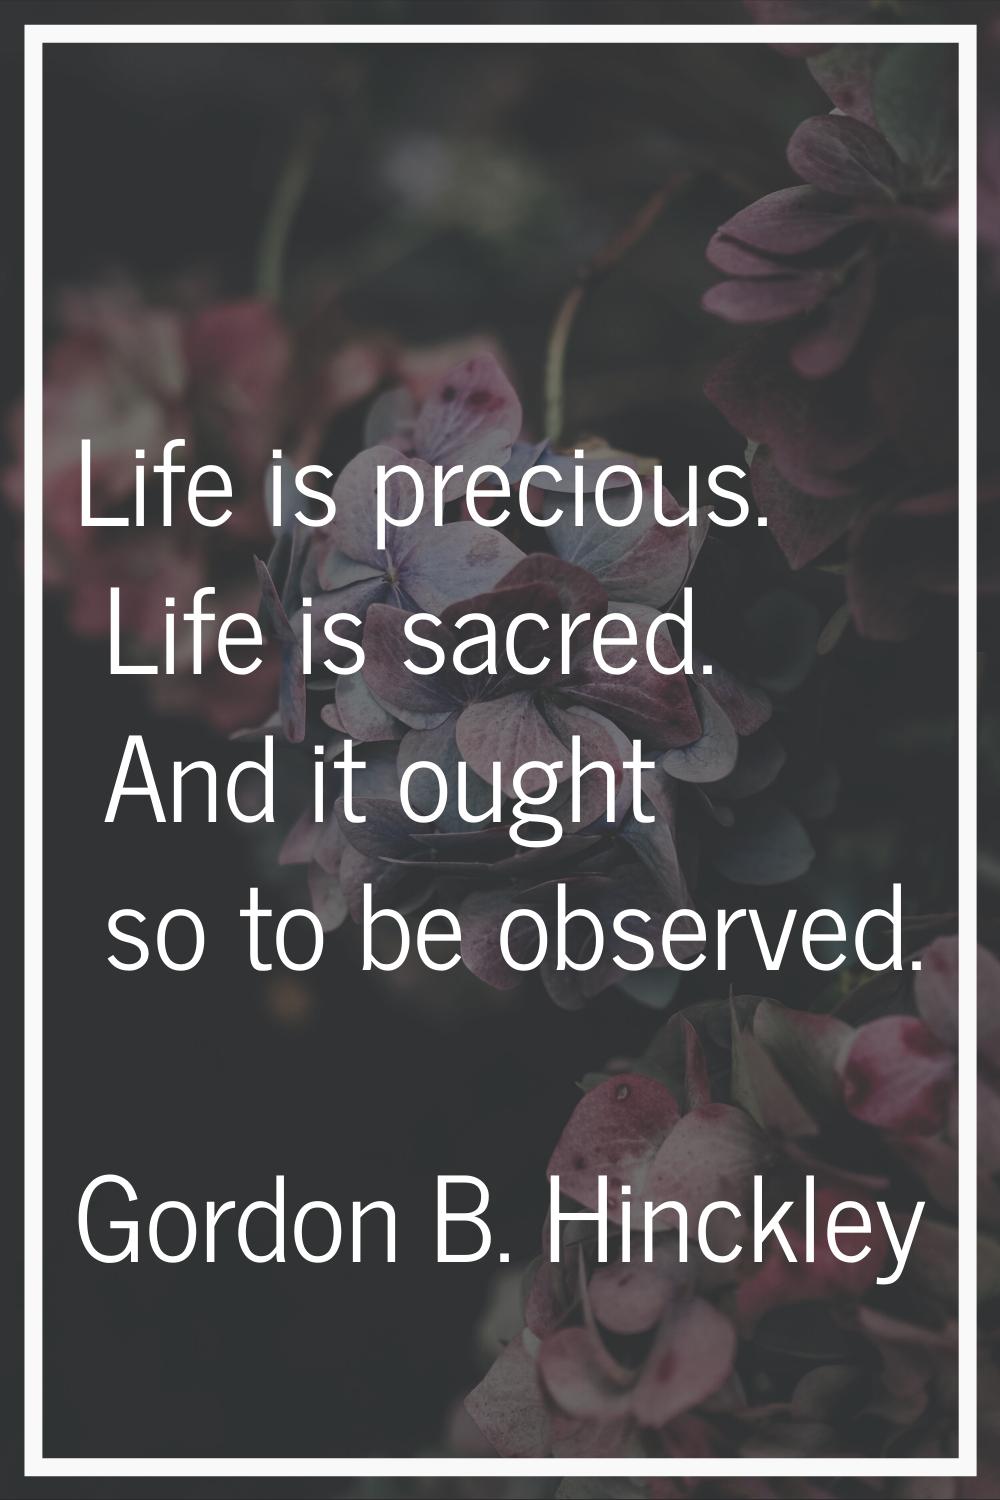 Life is precious. Life is sacred. And it ought so to be observed.